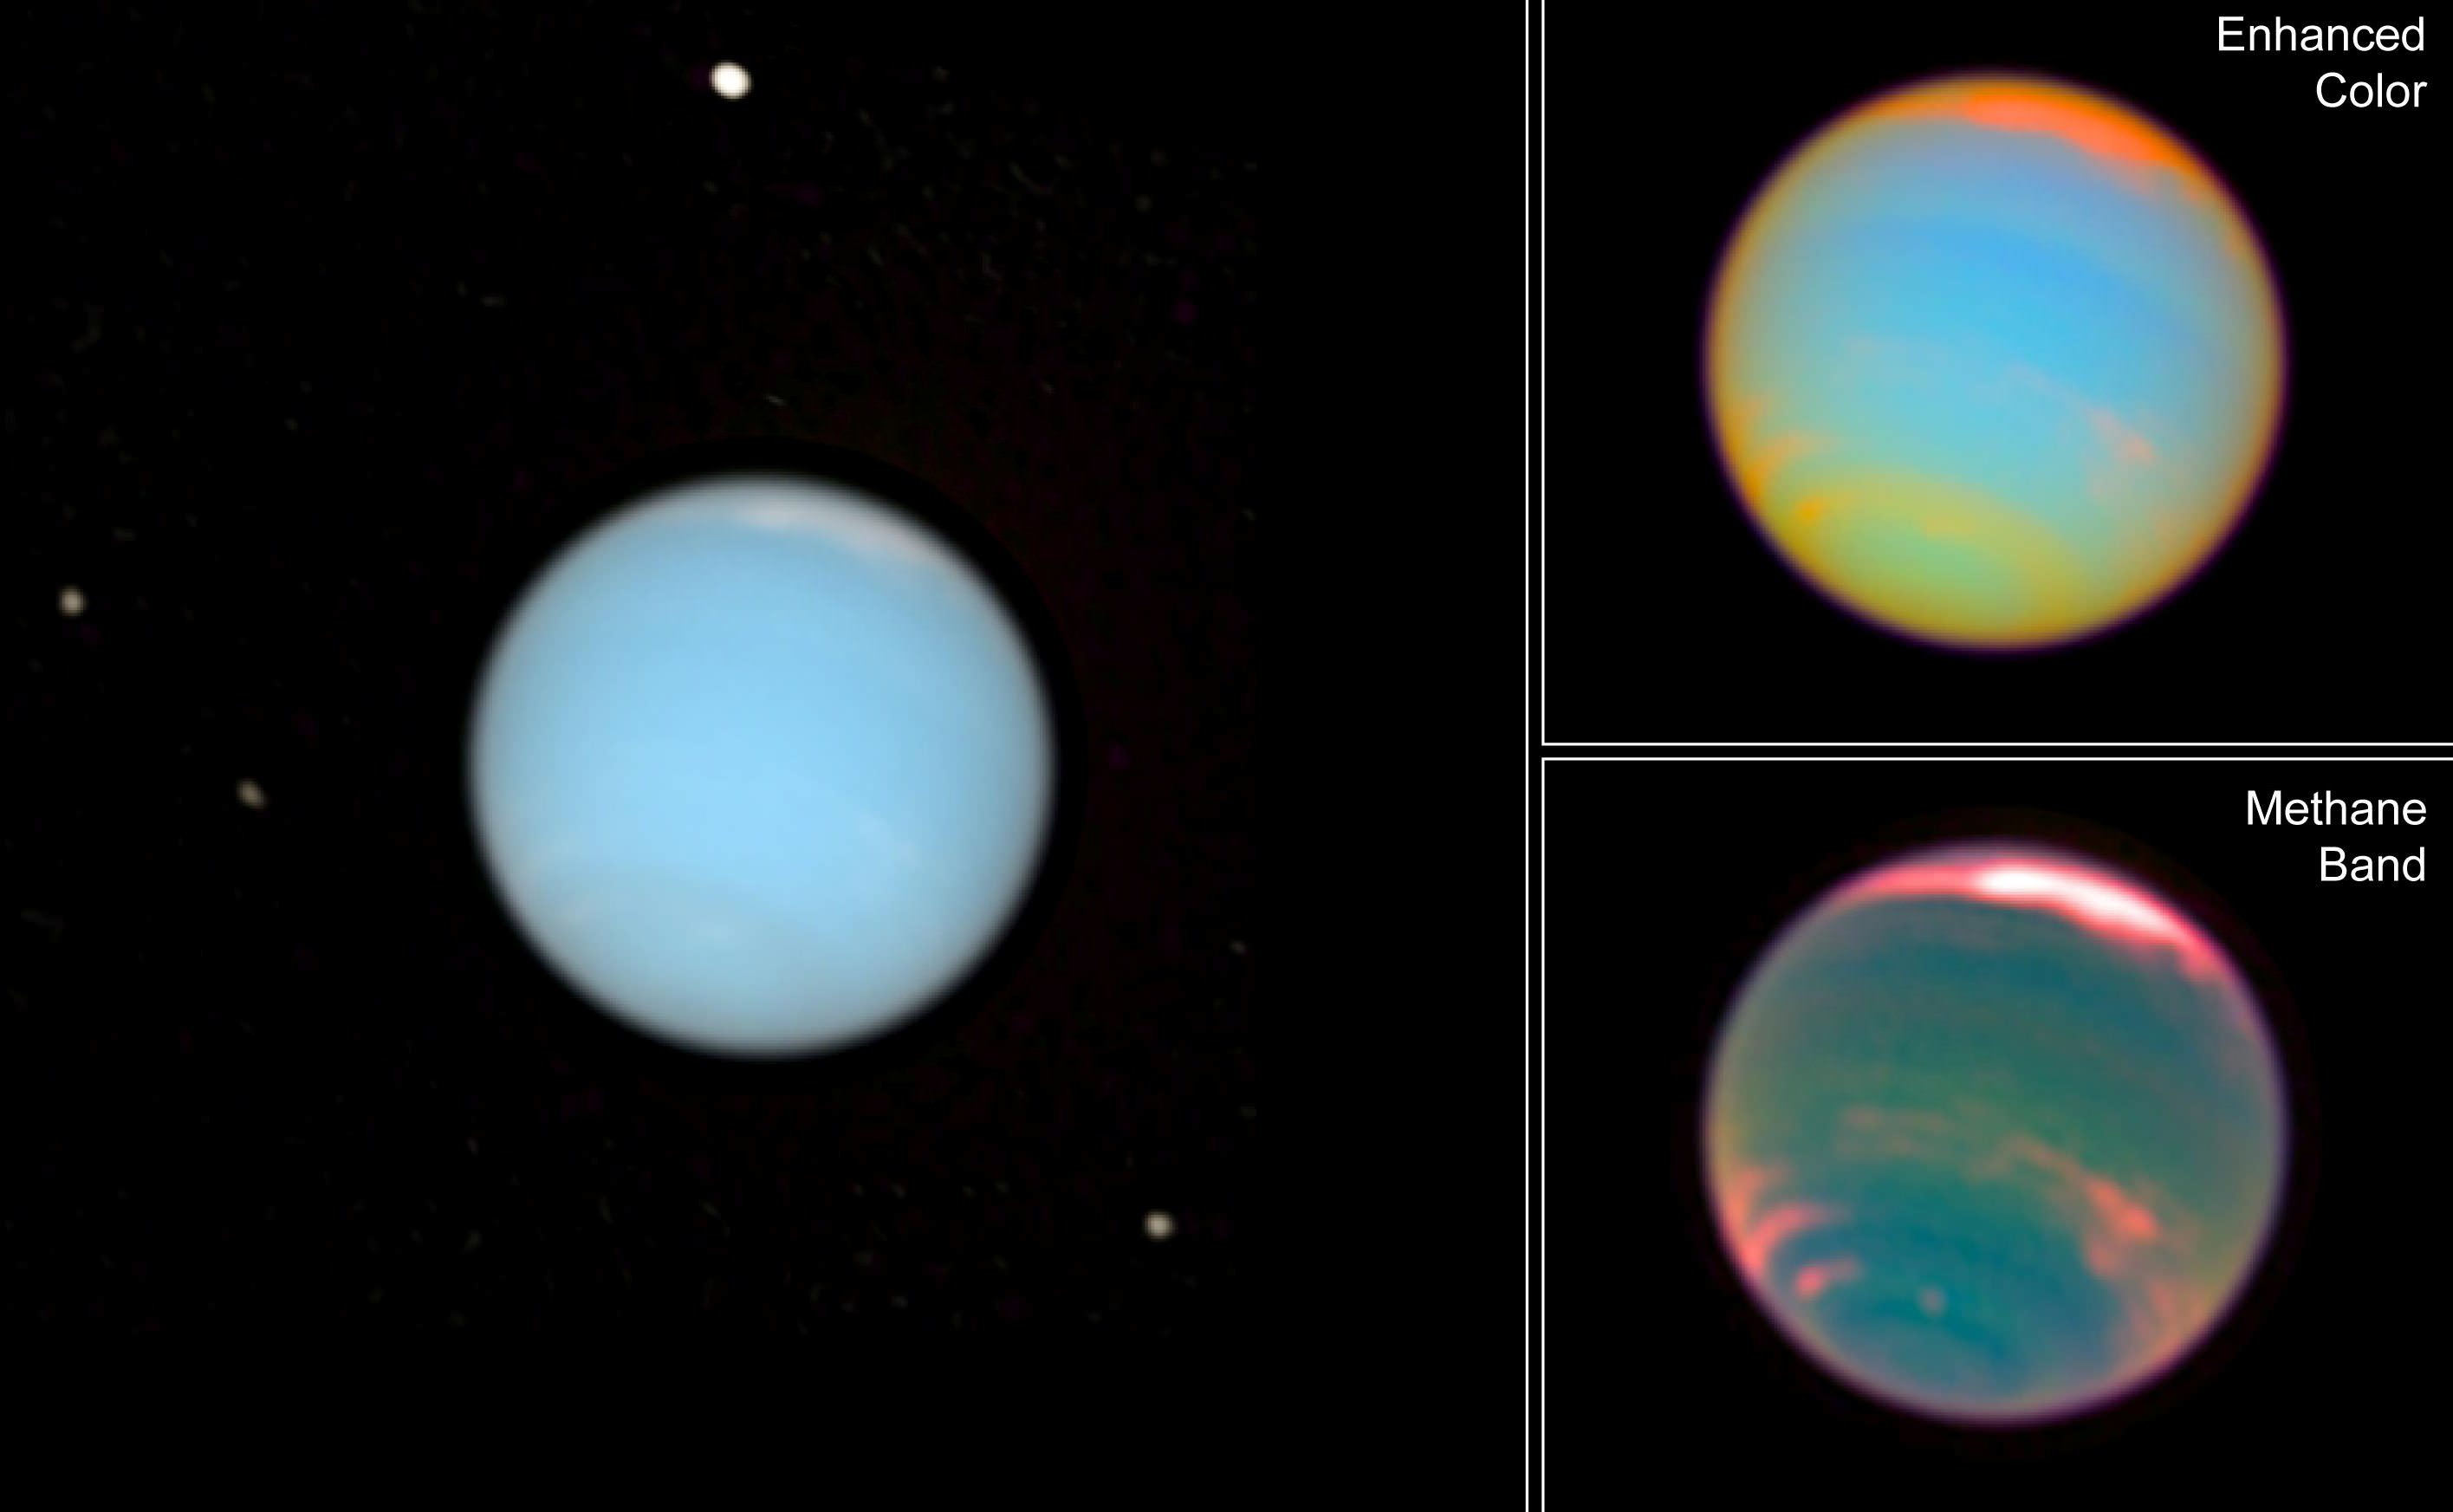 planet neptune and its moons